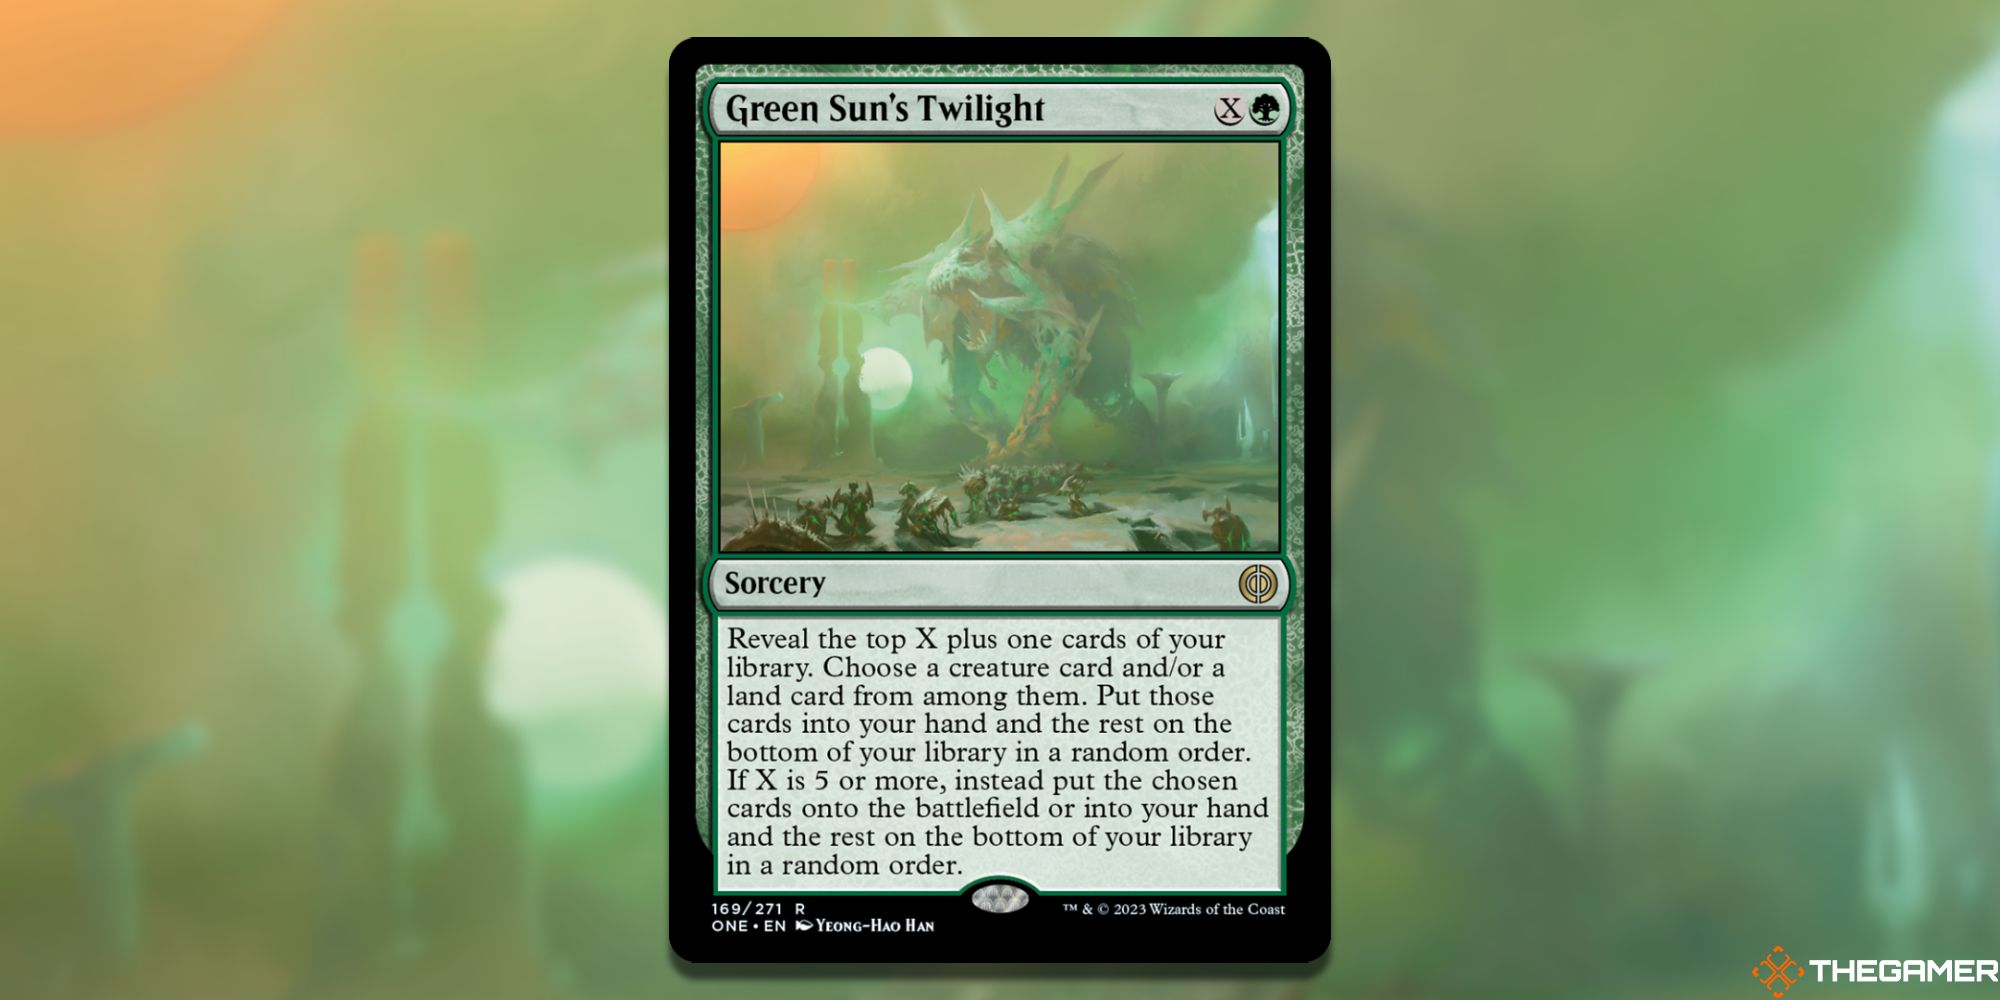 The card Green Sun's Twilight from Magic: The Gathering.